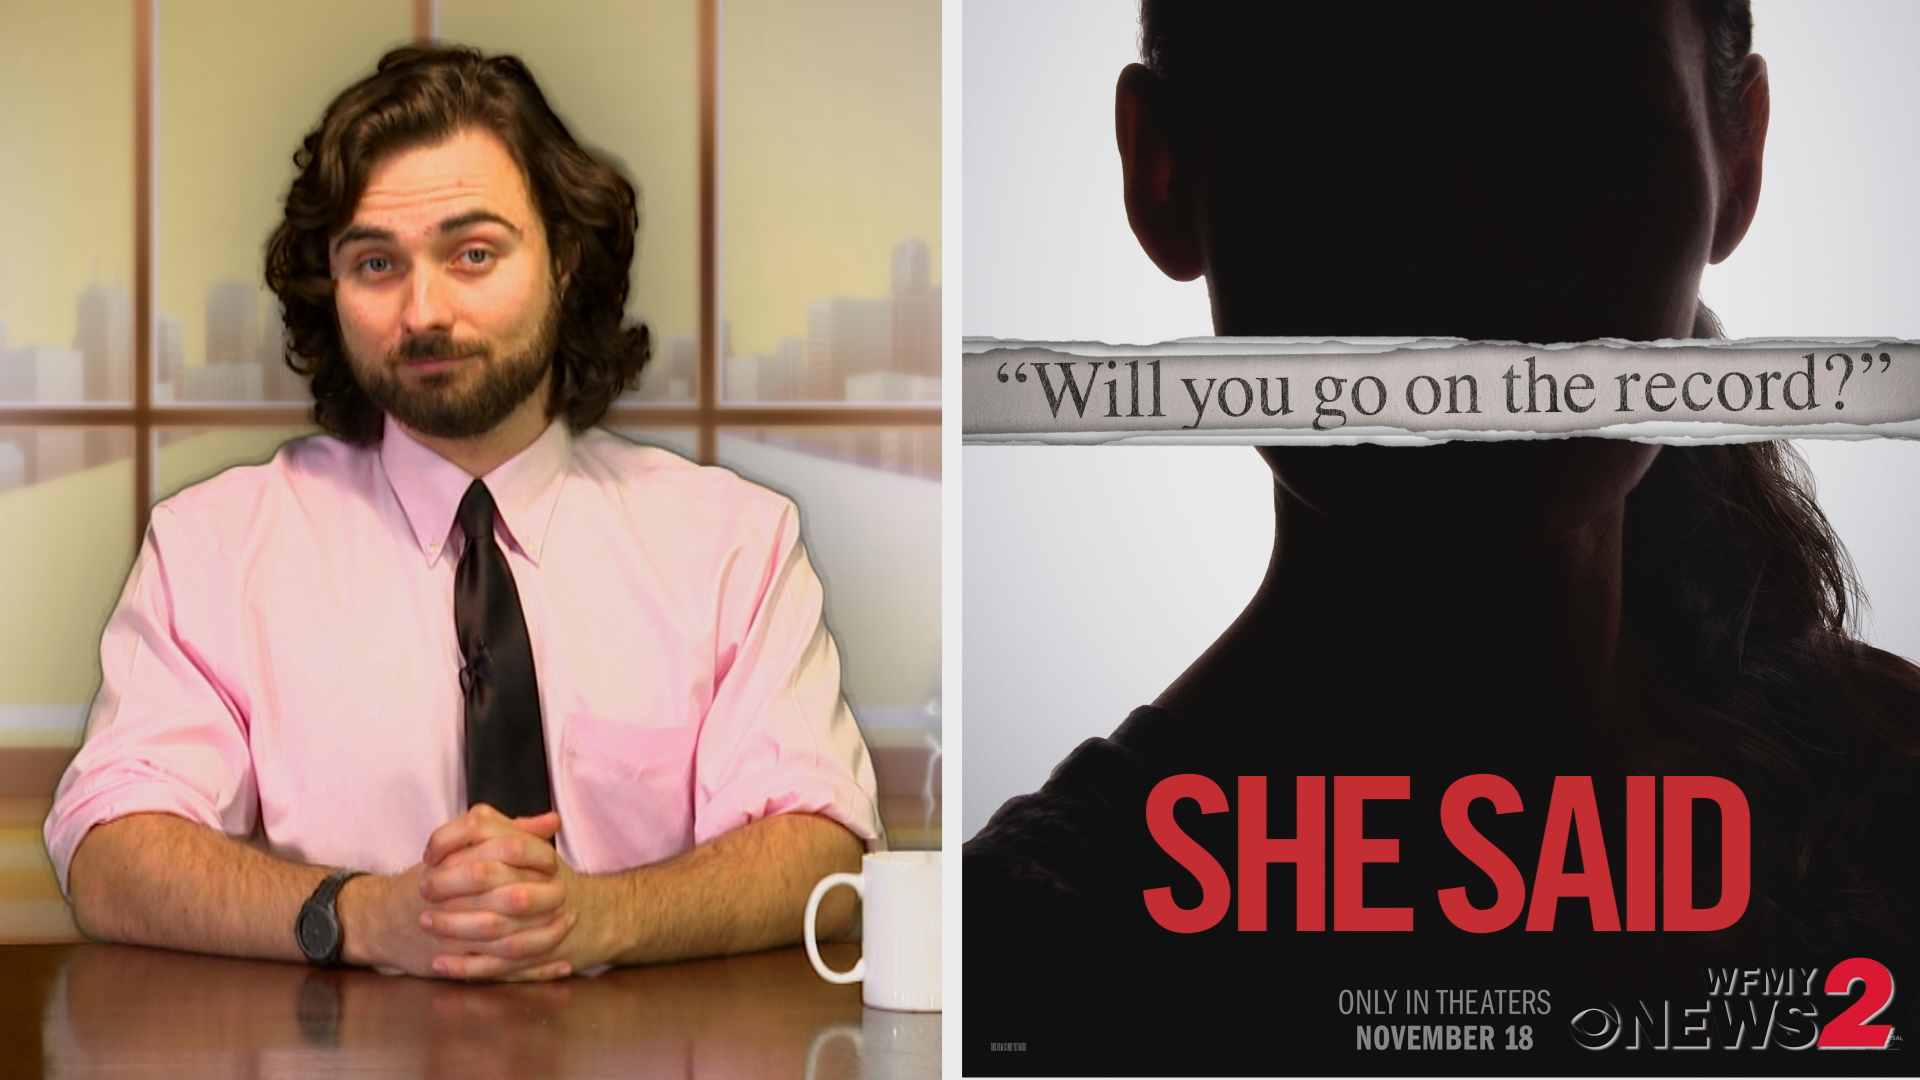 The new film, "She Said", takes a hard look at the Harvey Weinstein investigation and sexual abuse in Hollywood.